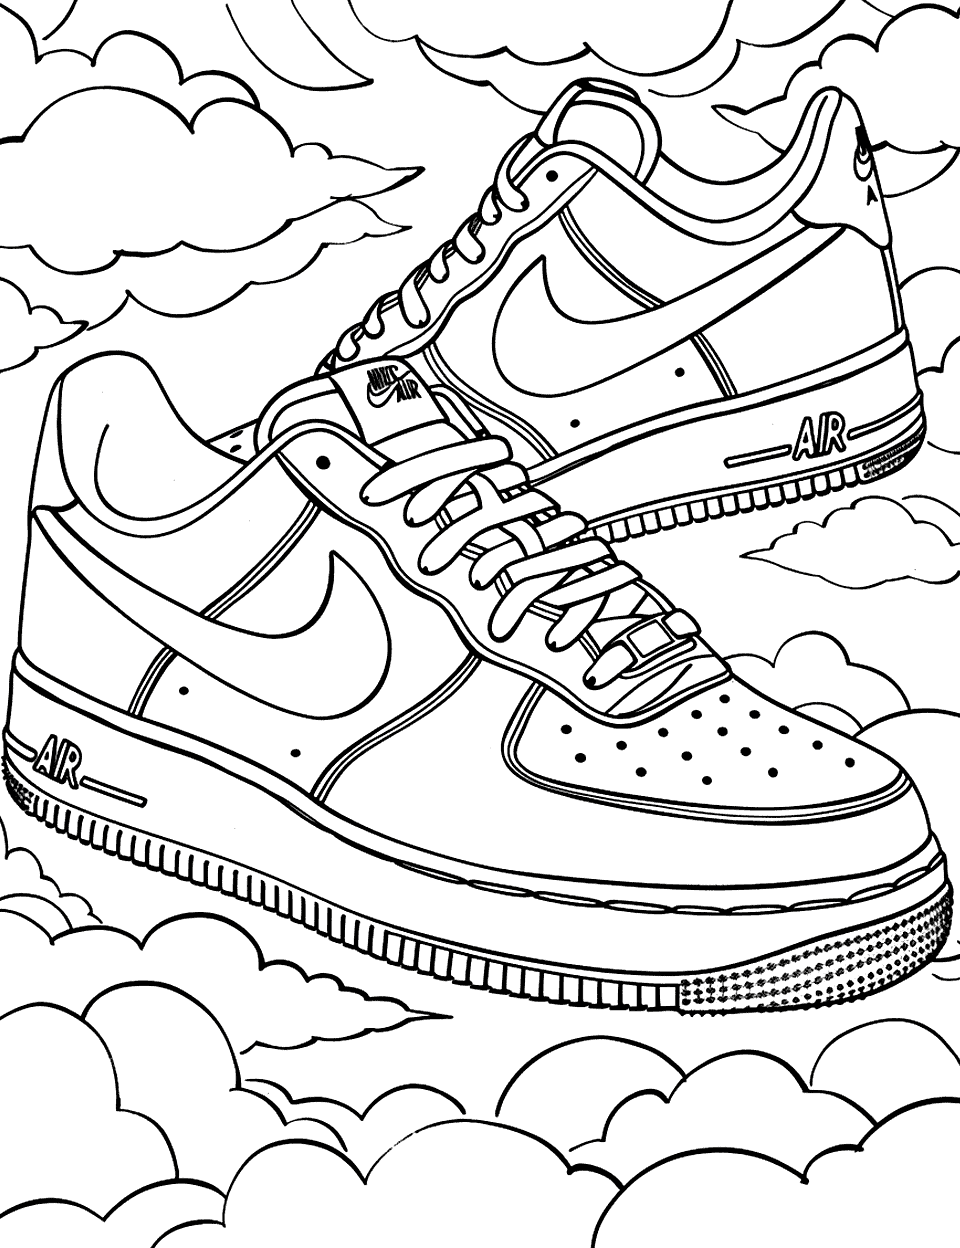 Nike Air Force Fun Shoe Coloring Page - Nike Air Force shoes with a backdrop of clouds to suggest high-flying fun.